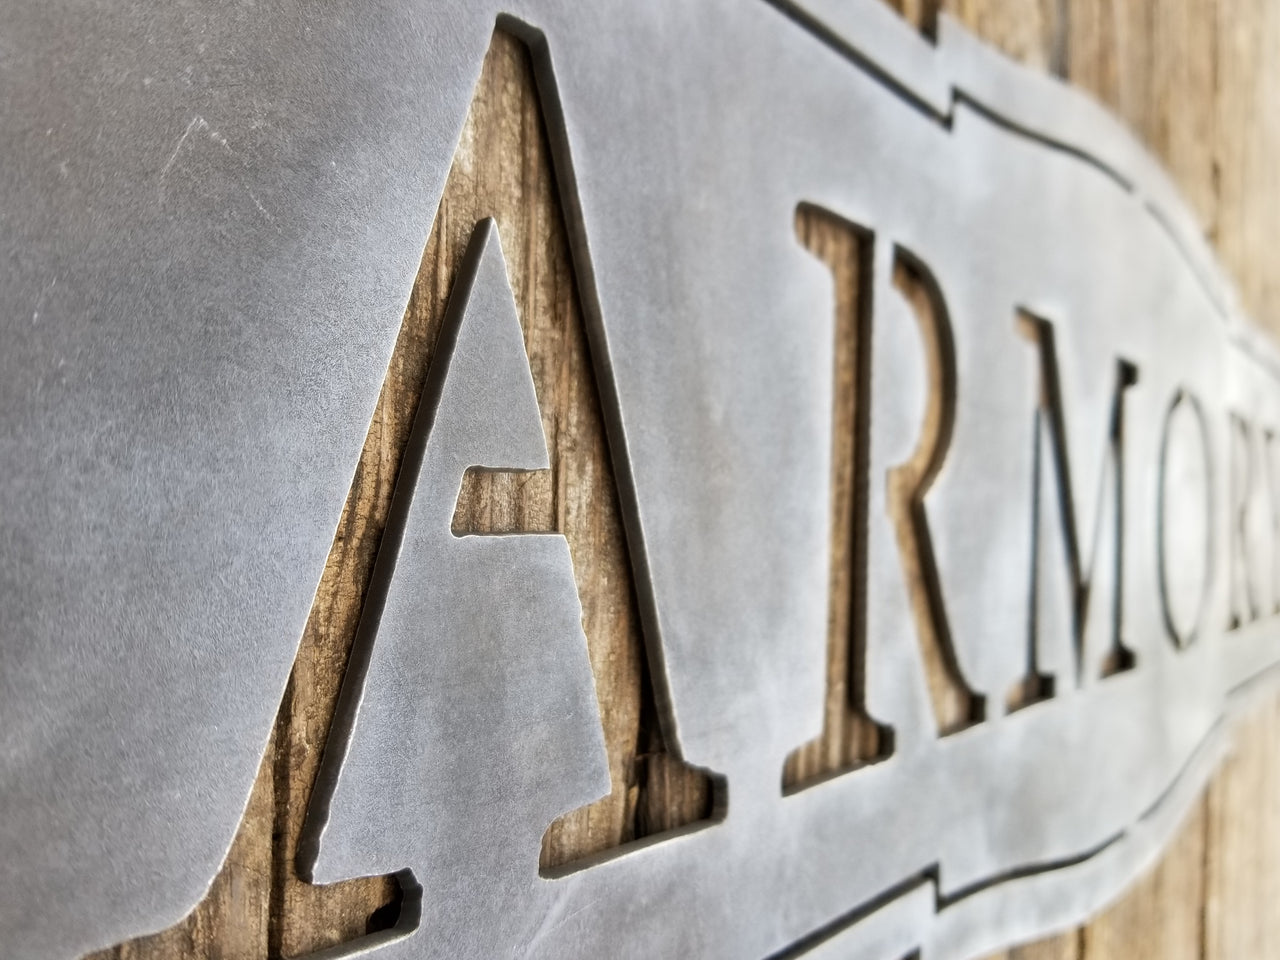 This sign has a classic shape and reads, "ARMORY"